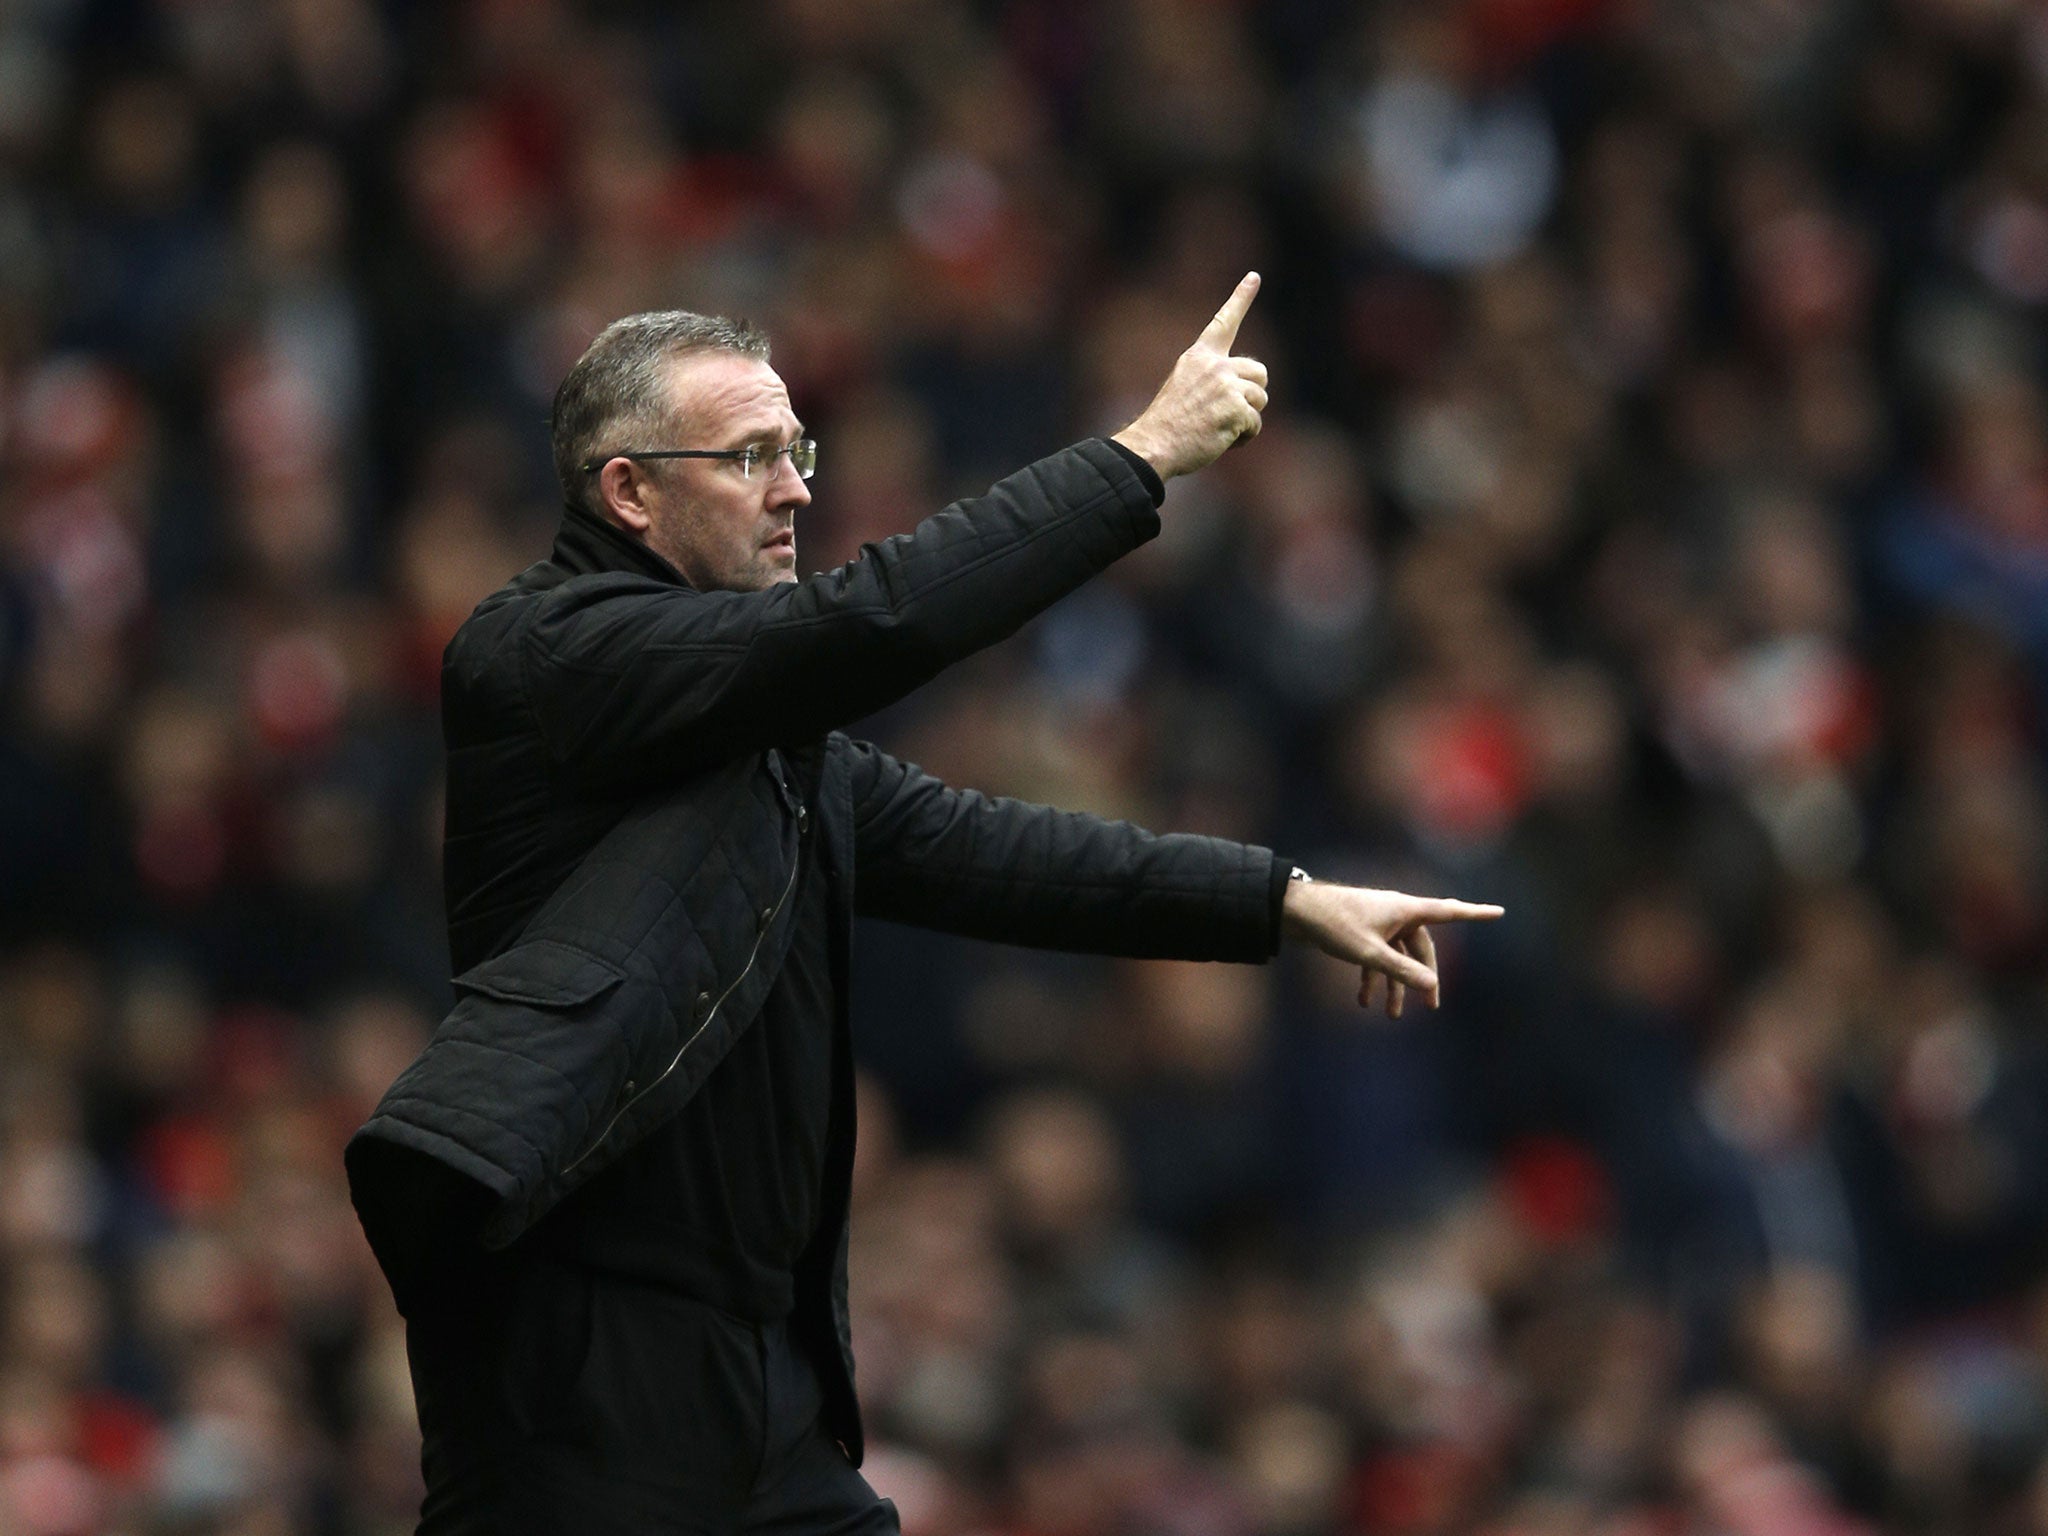 Paul Lambert makes a gesture on the touchline at the Emirates